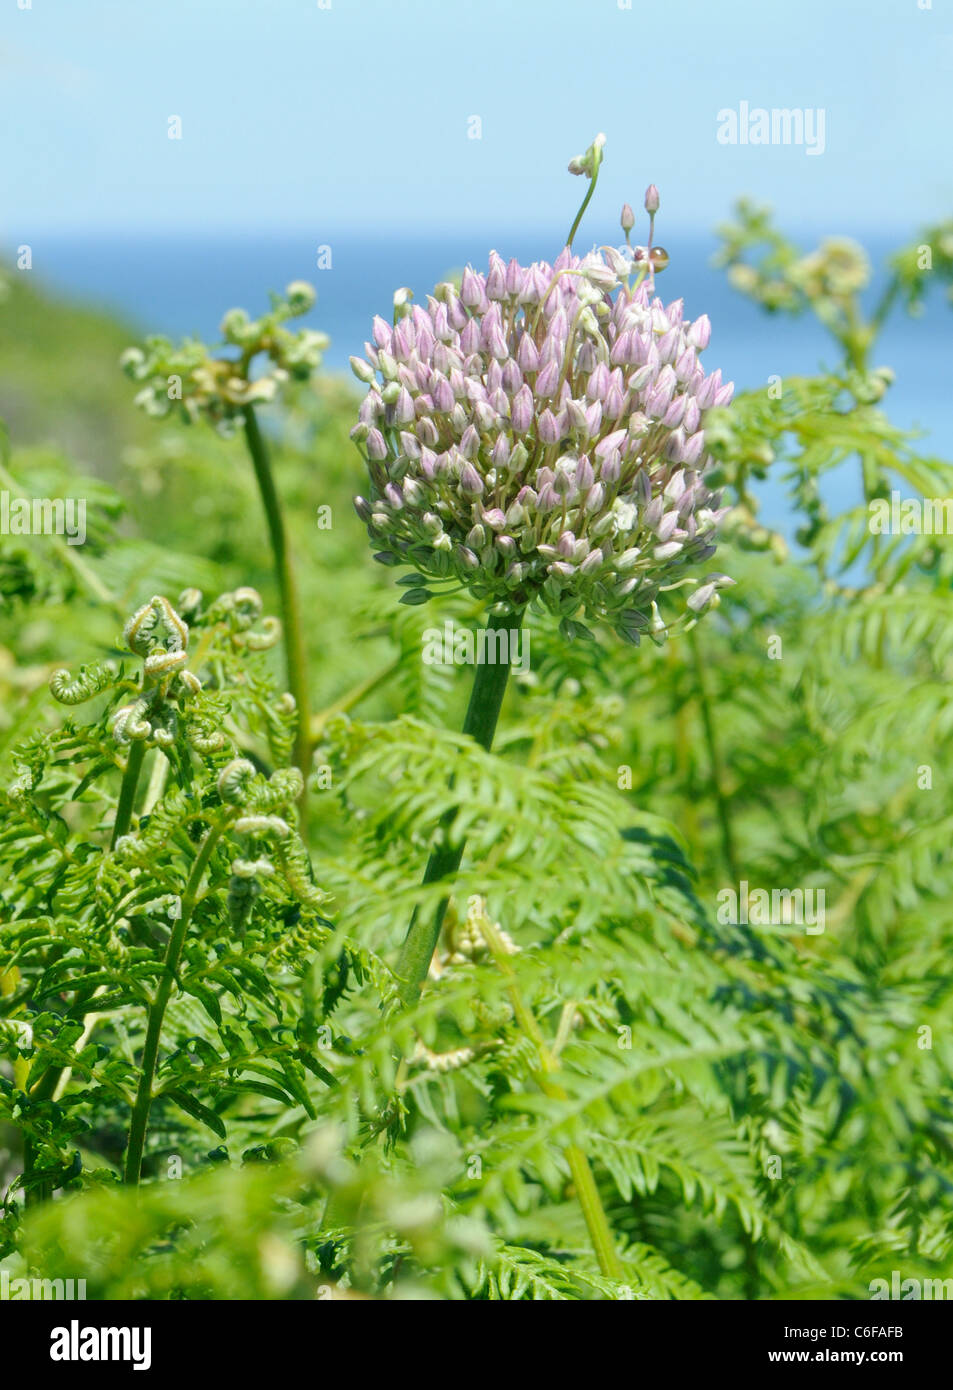 Alium species growing naturalised among bracken on the cliff top on Herm. Herm, Channel Islands, UK. Stock Photo